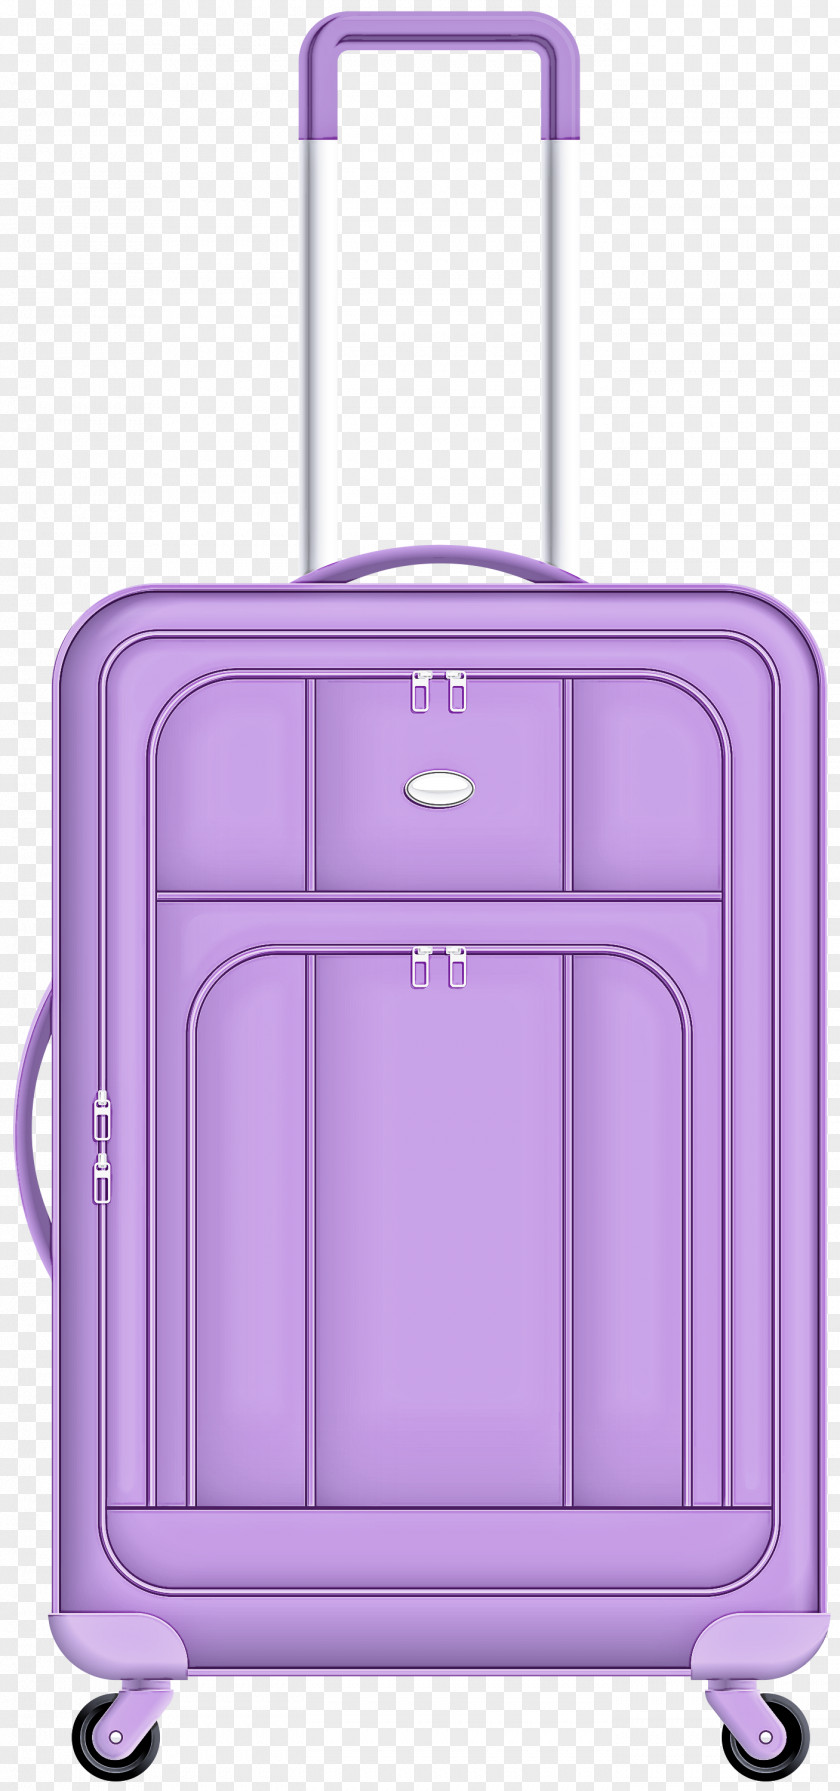 Carry-on Luggage Suitcase Baggage Handbag Hand PNG